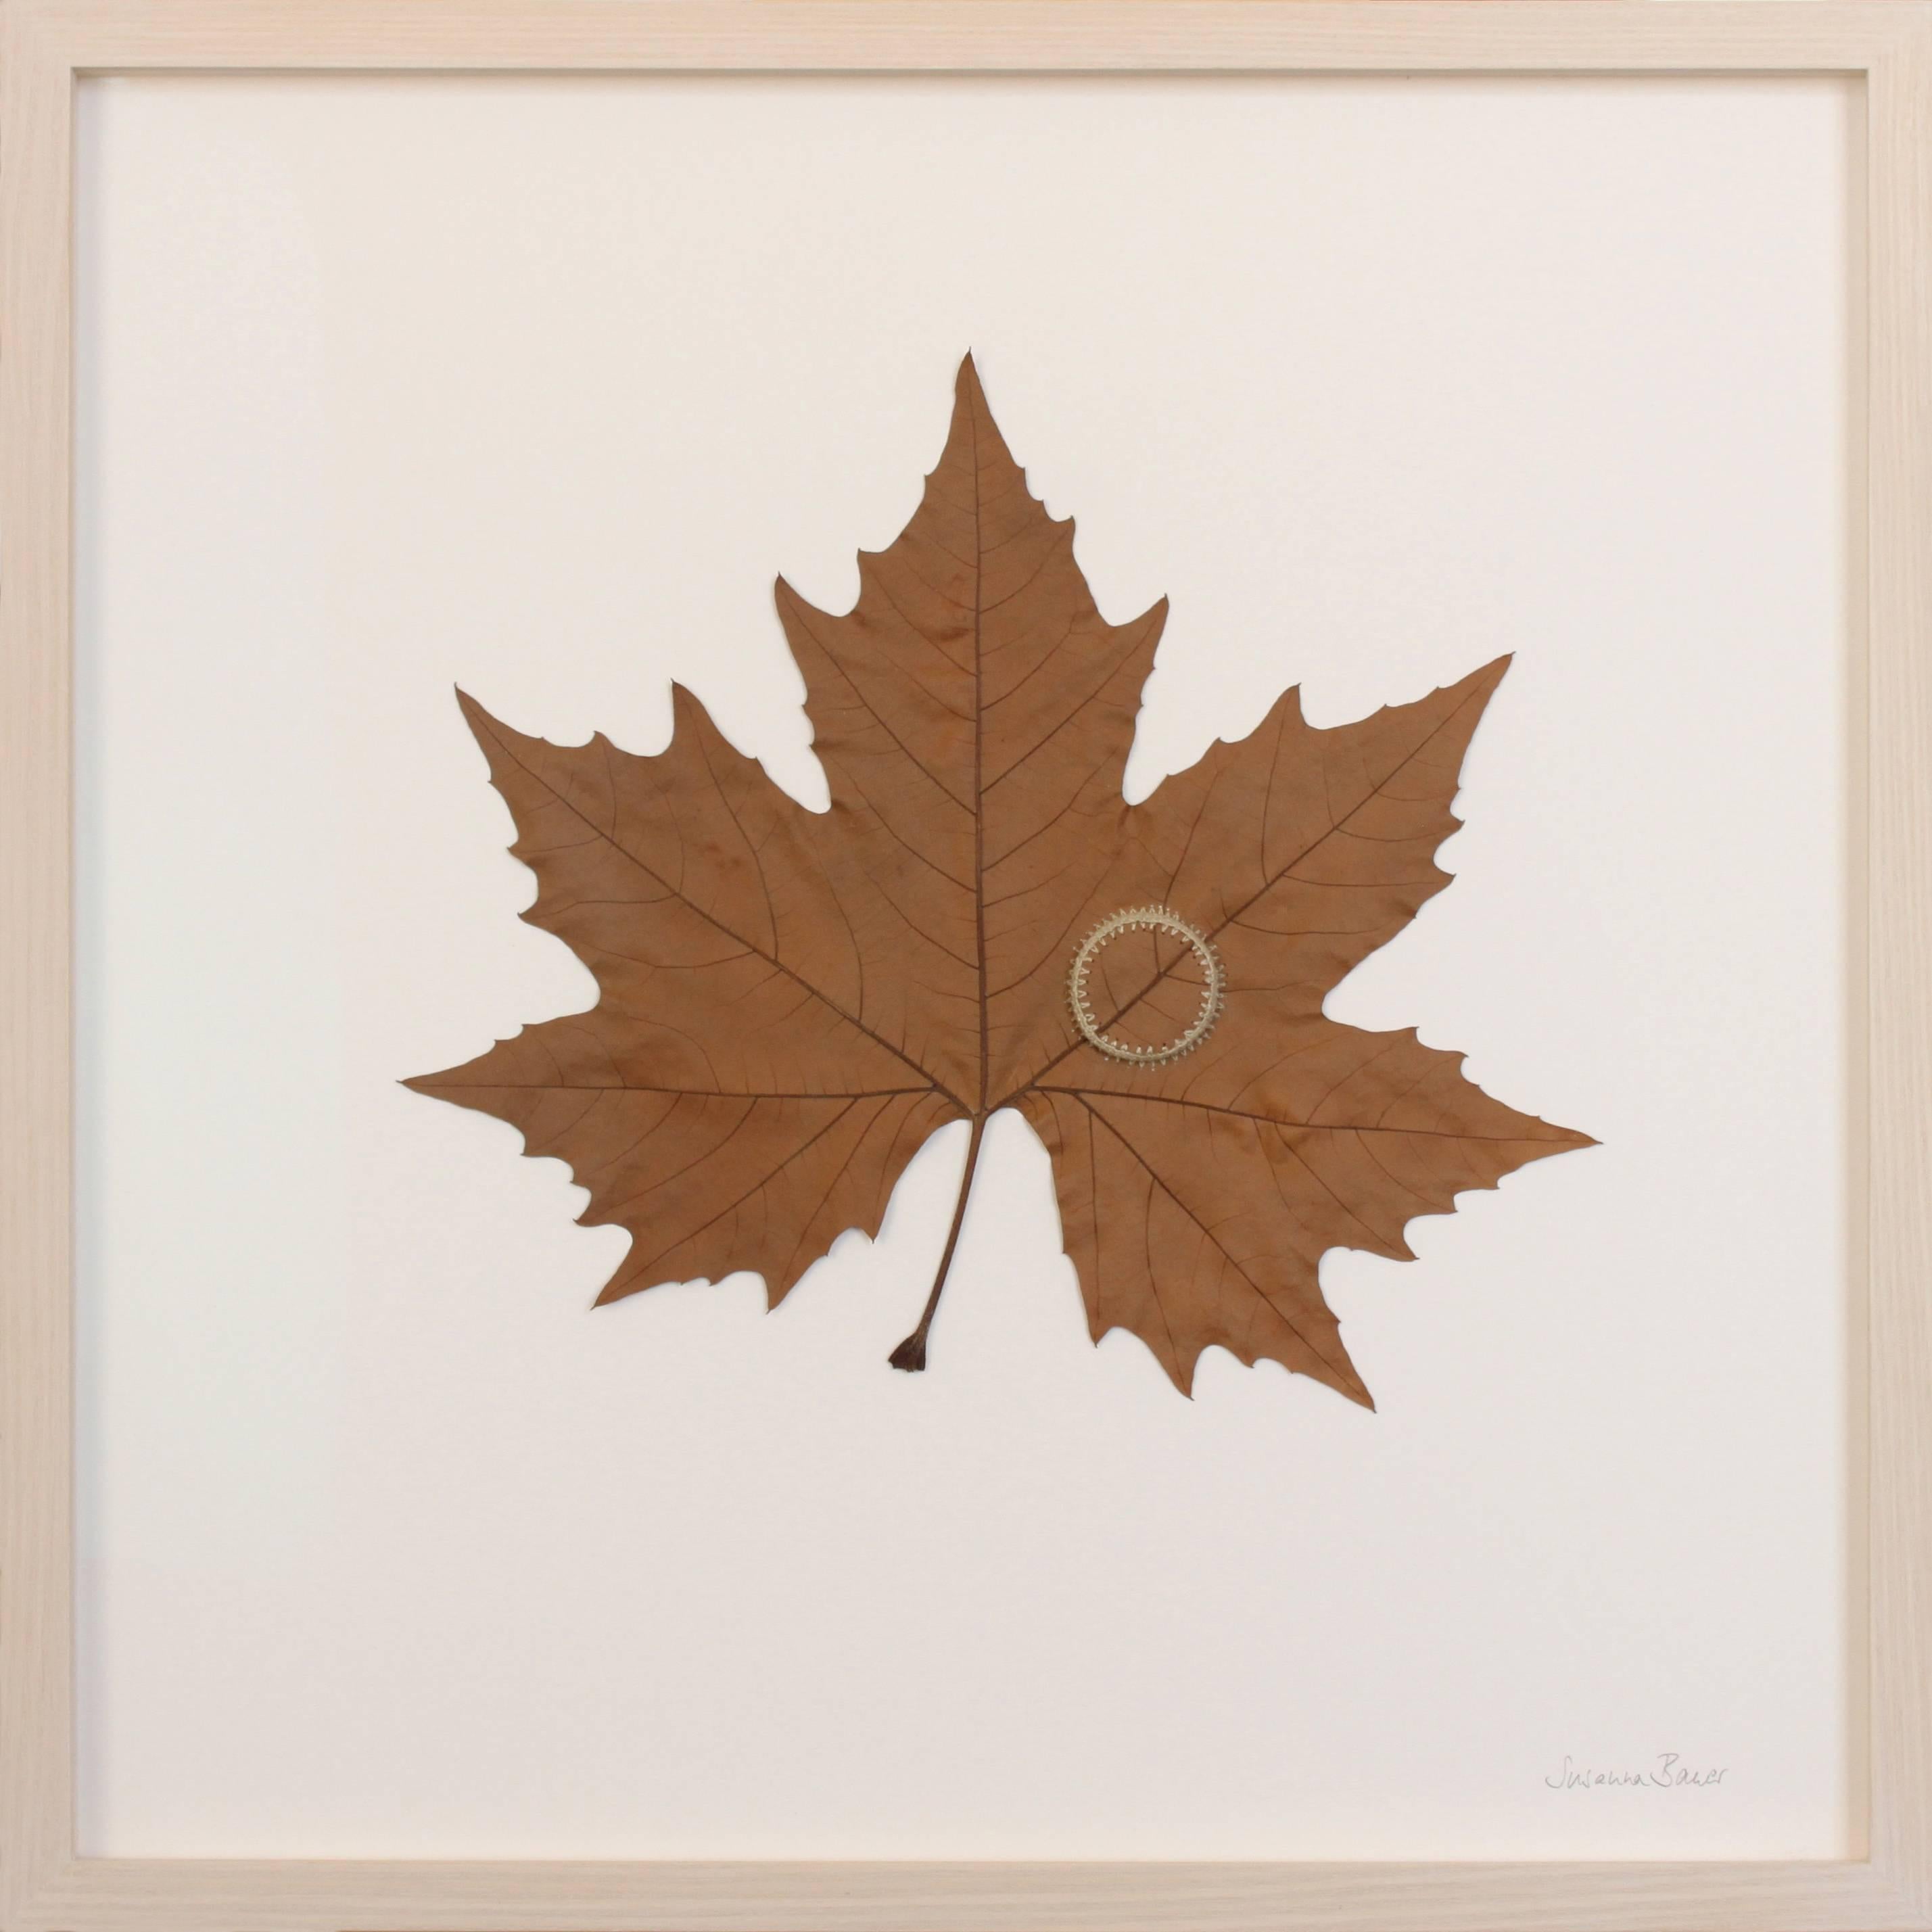 Heart II - embroidered leaf on paper - Mixed Media Art by Susanna Bauer